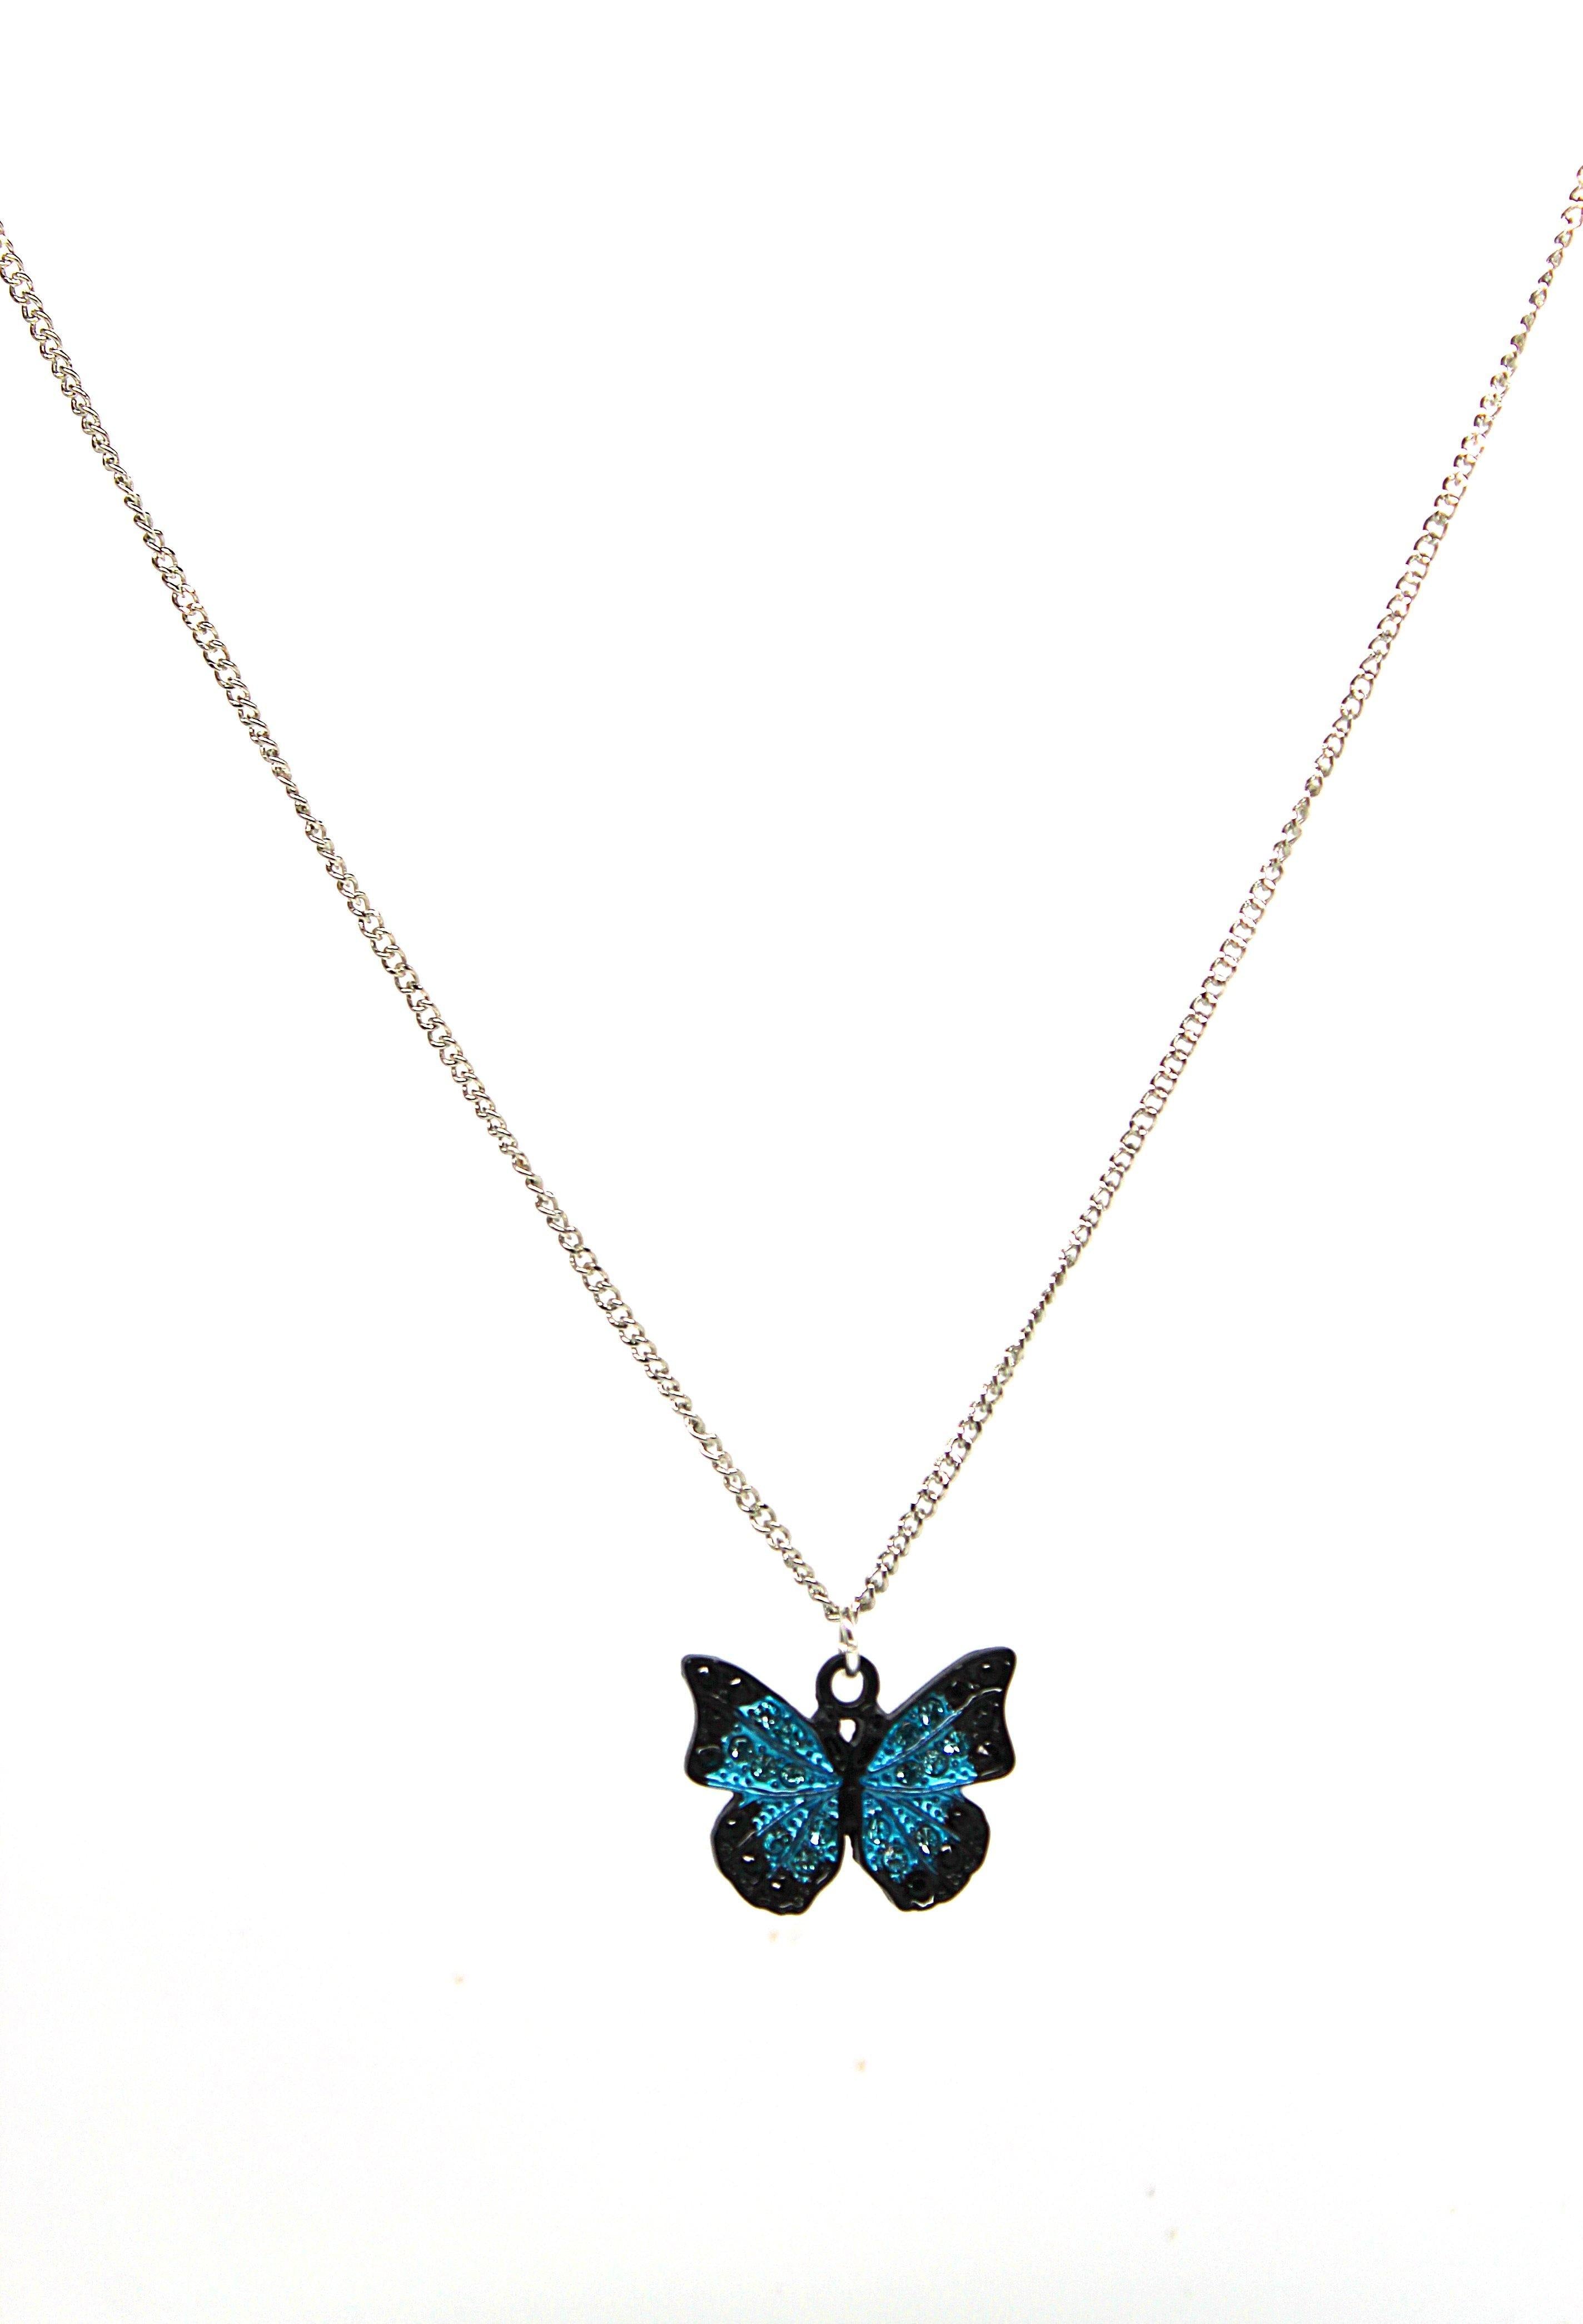 Butterfly Blue Necklace - Wildtouch - Wildtouch